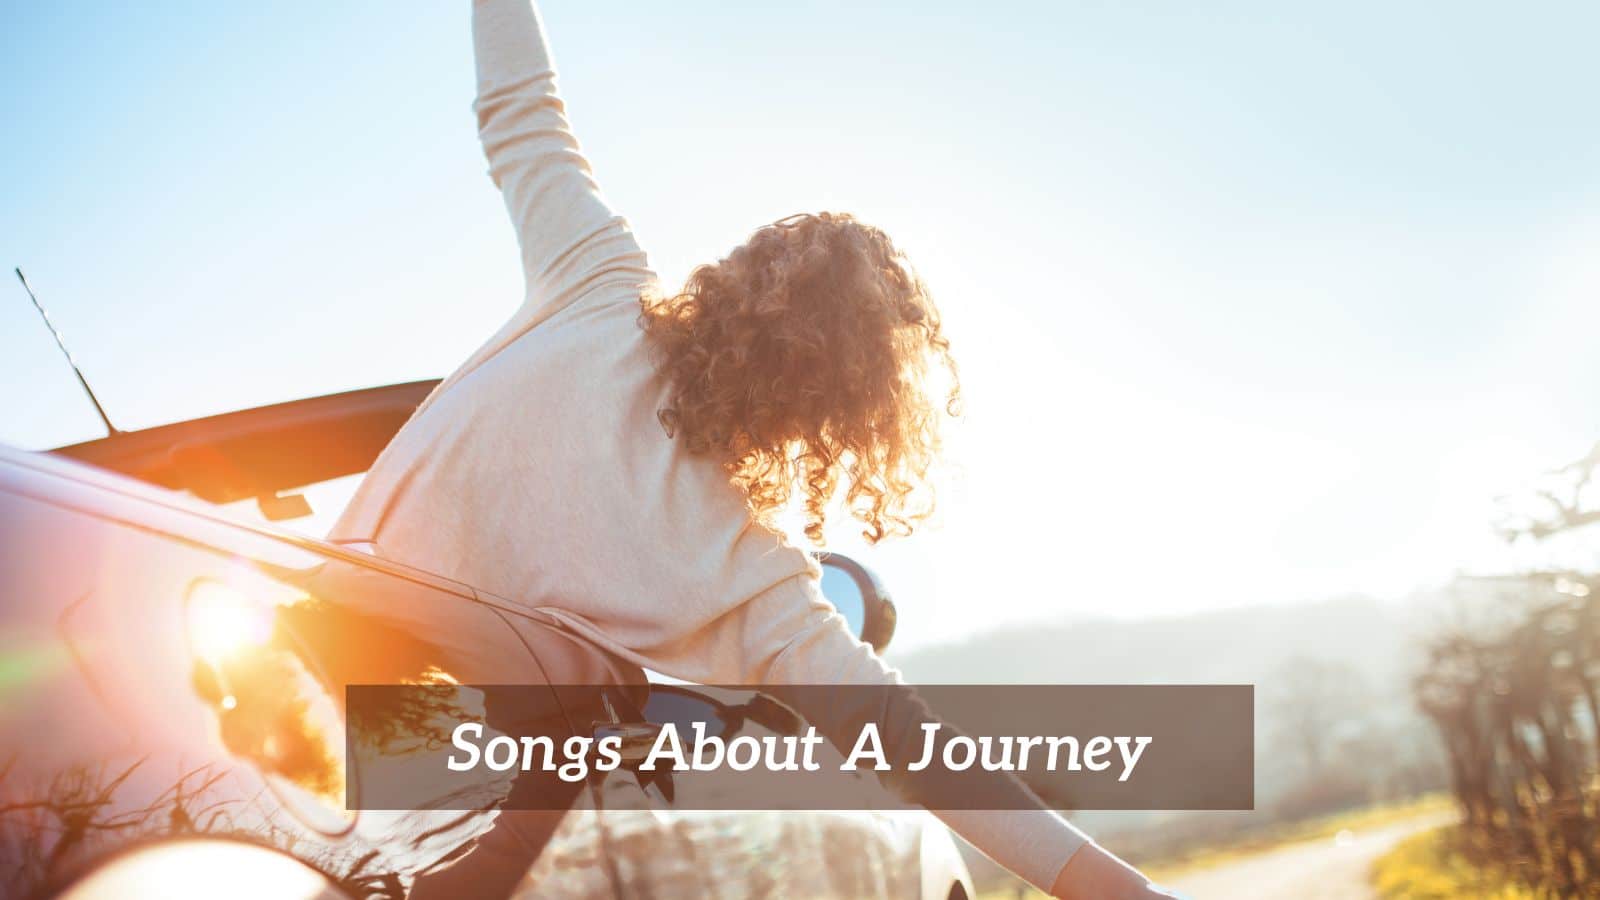 Songs About A Journey